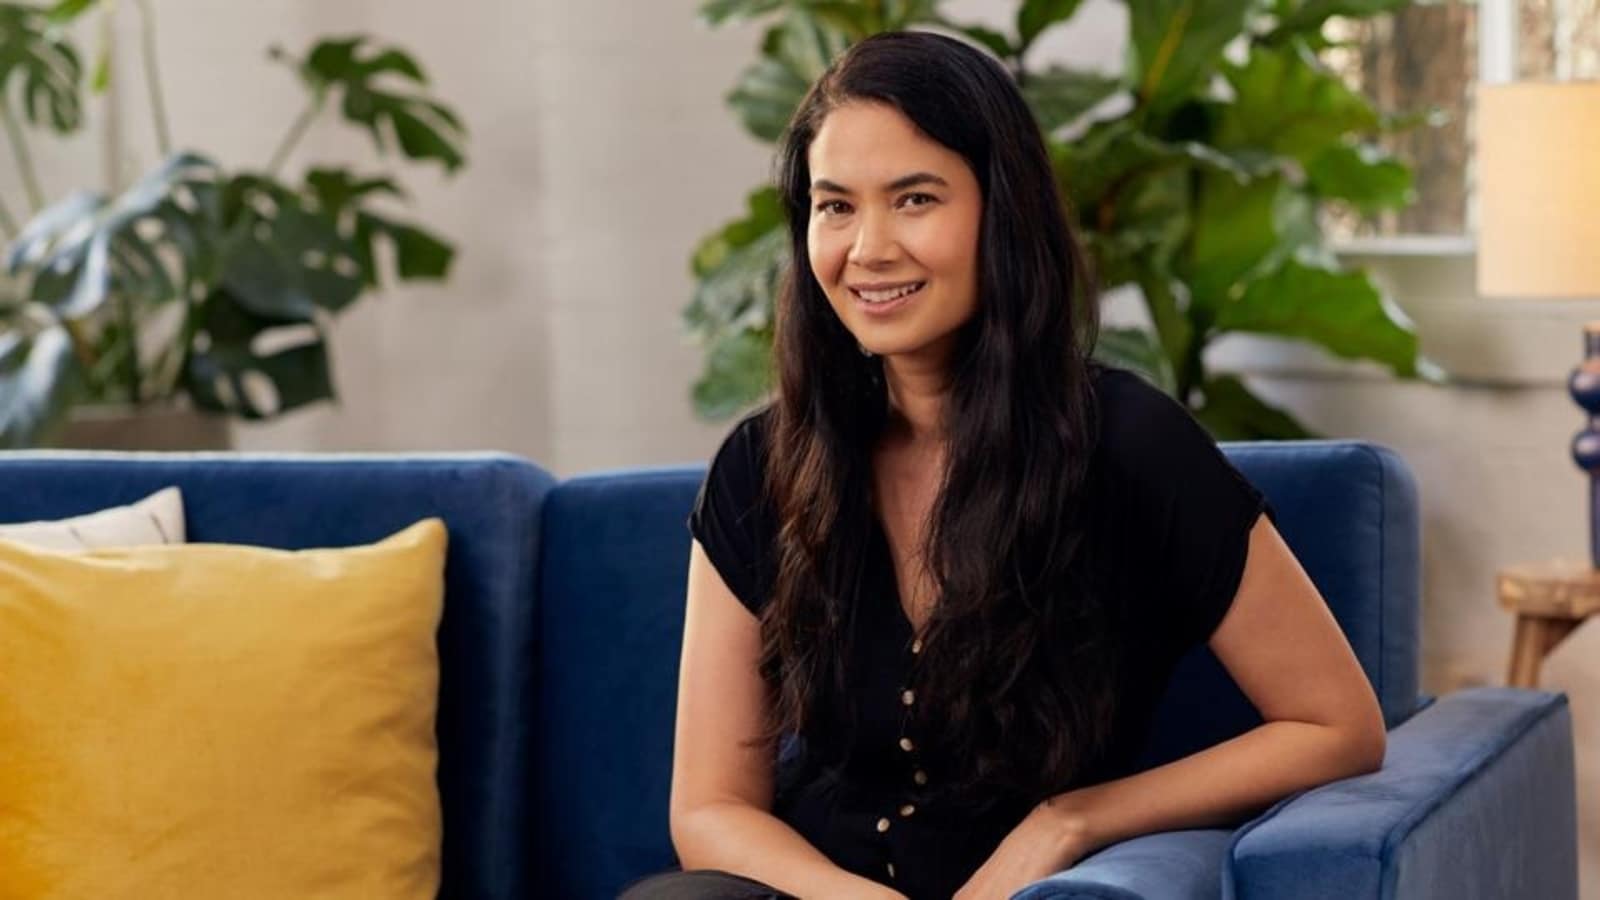 Photo of AI is supercharging people’s productivity: Melanie Perkins, CEO of Canva